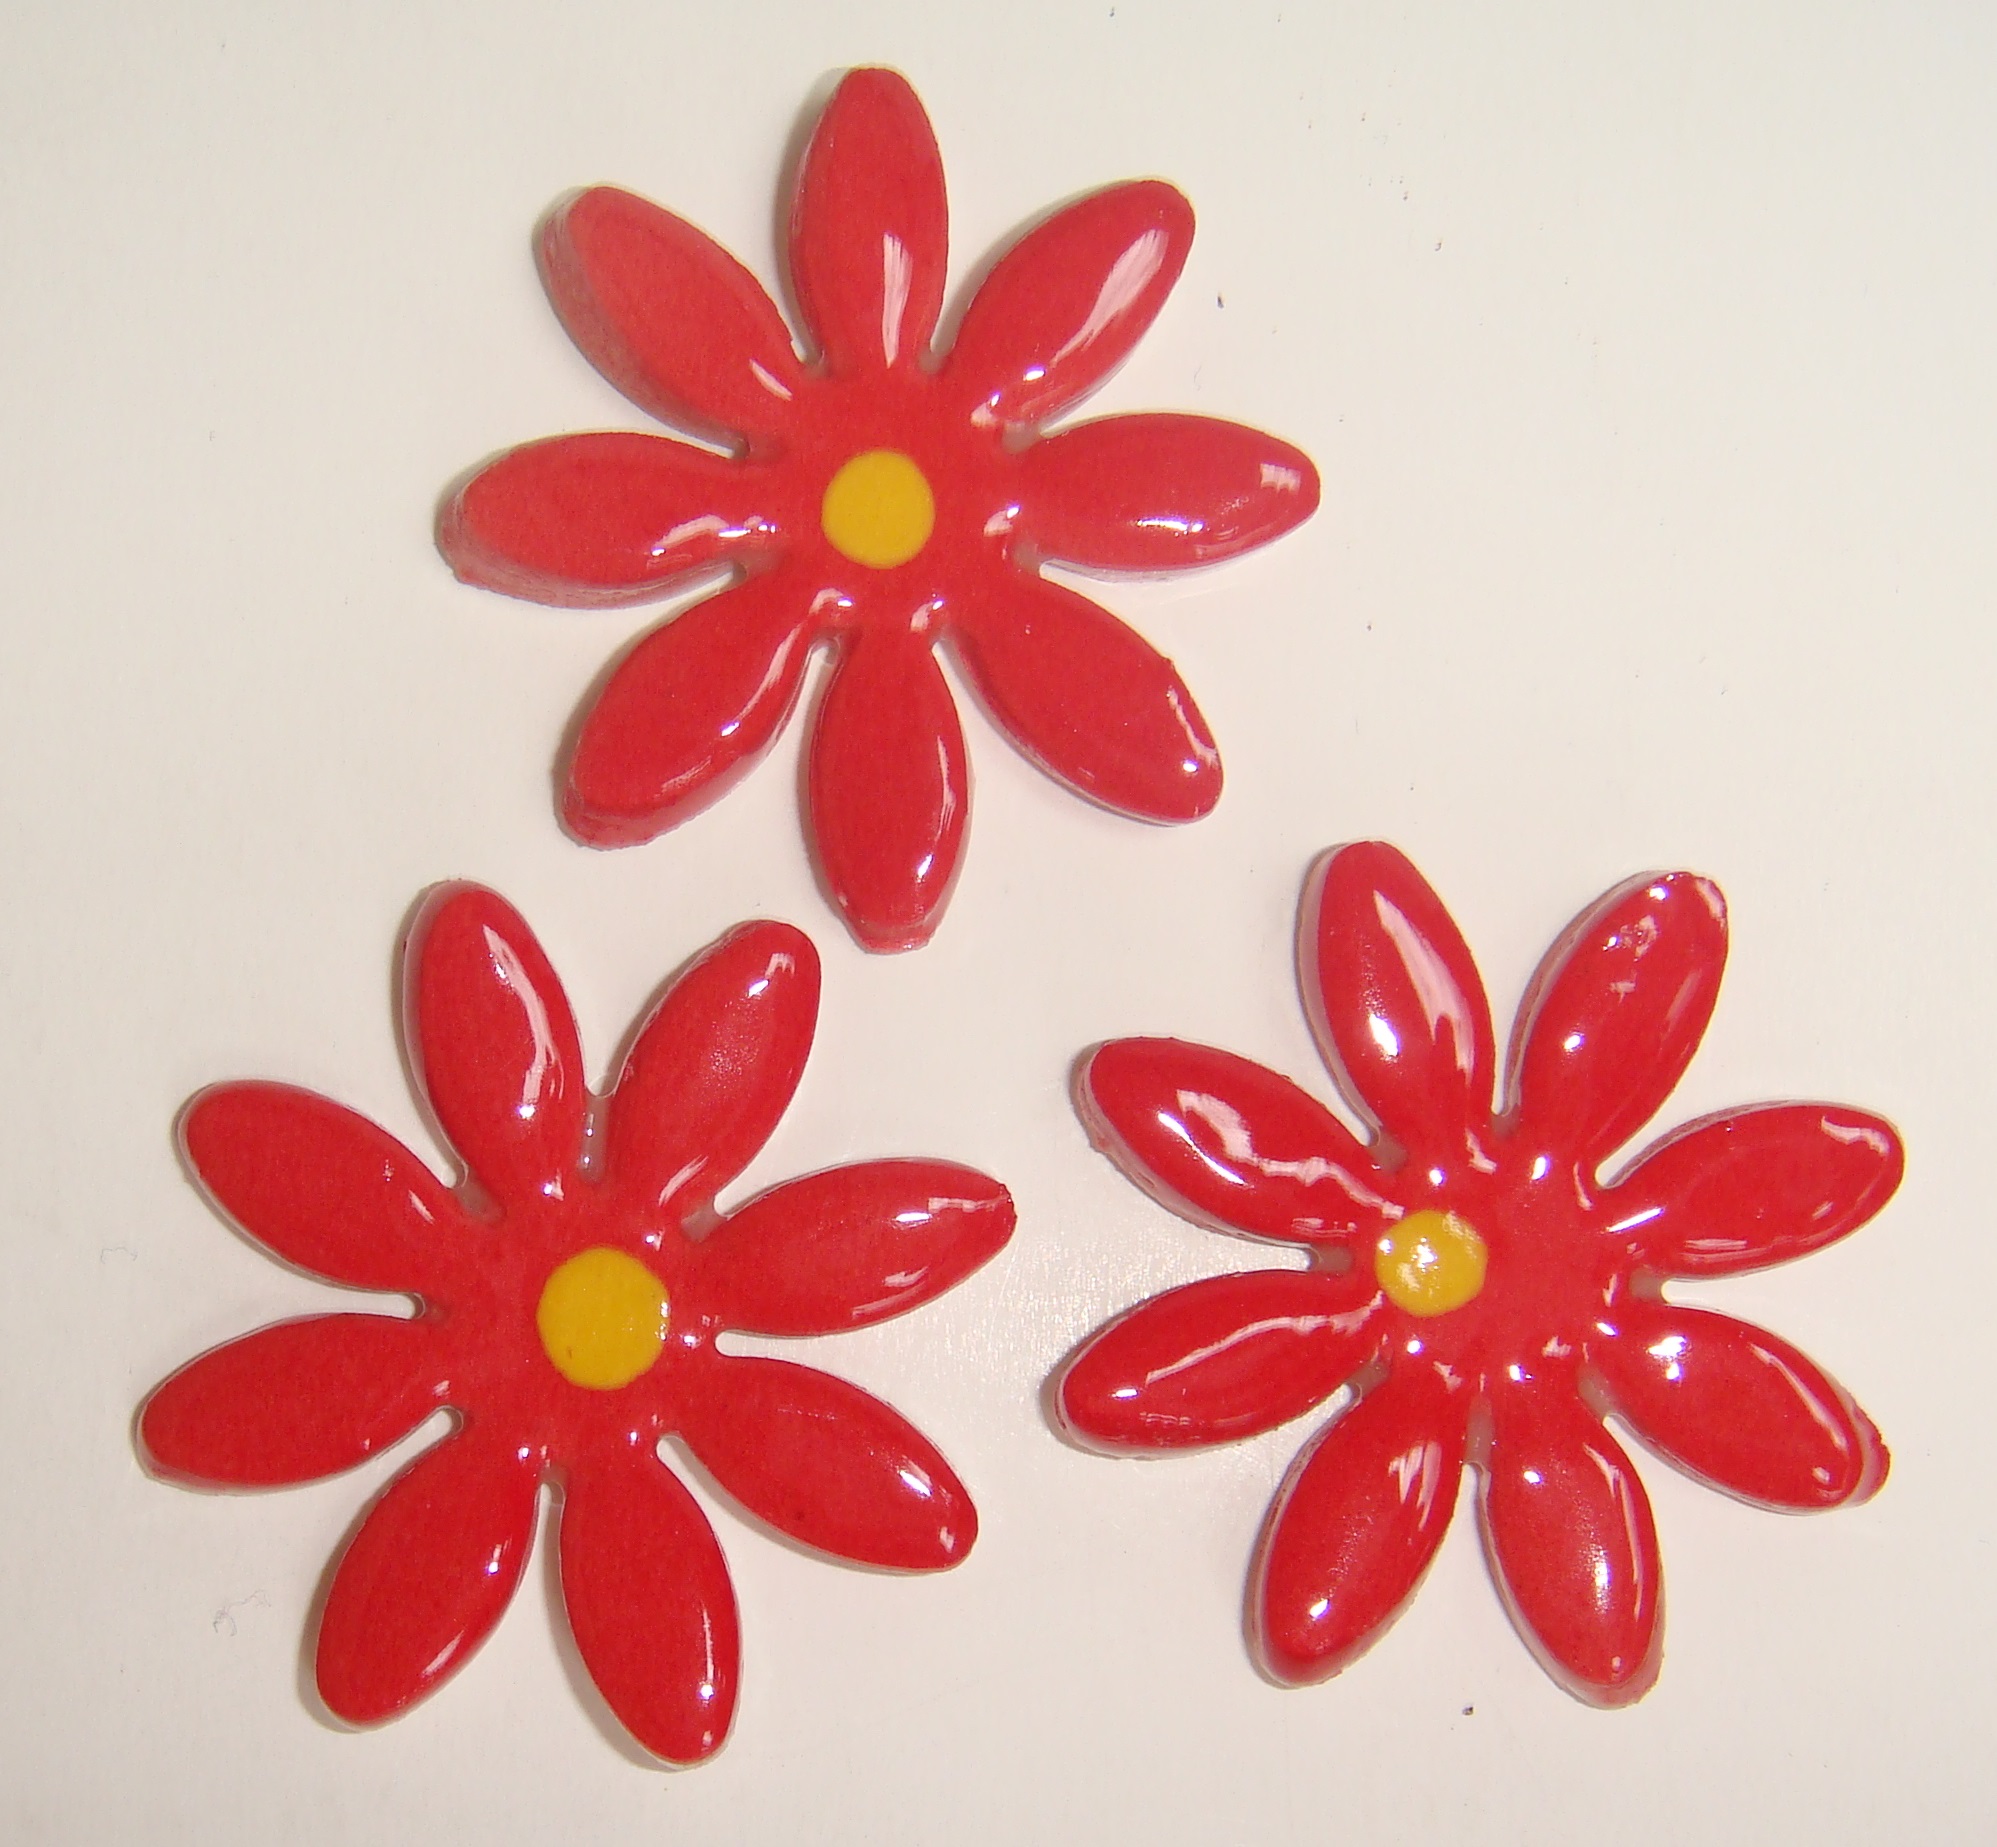 FLO-002 Daisy Large Red